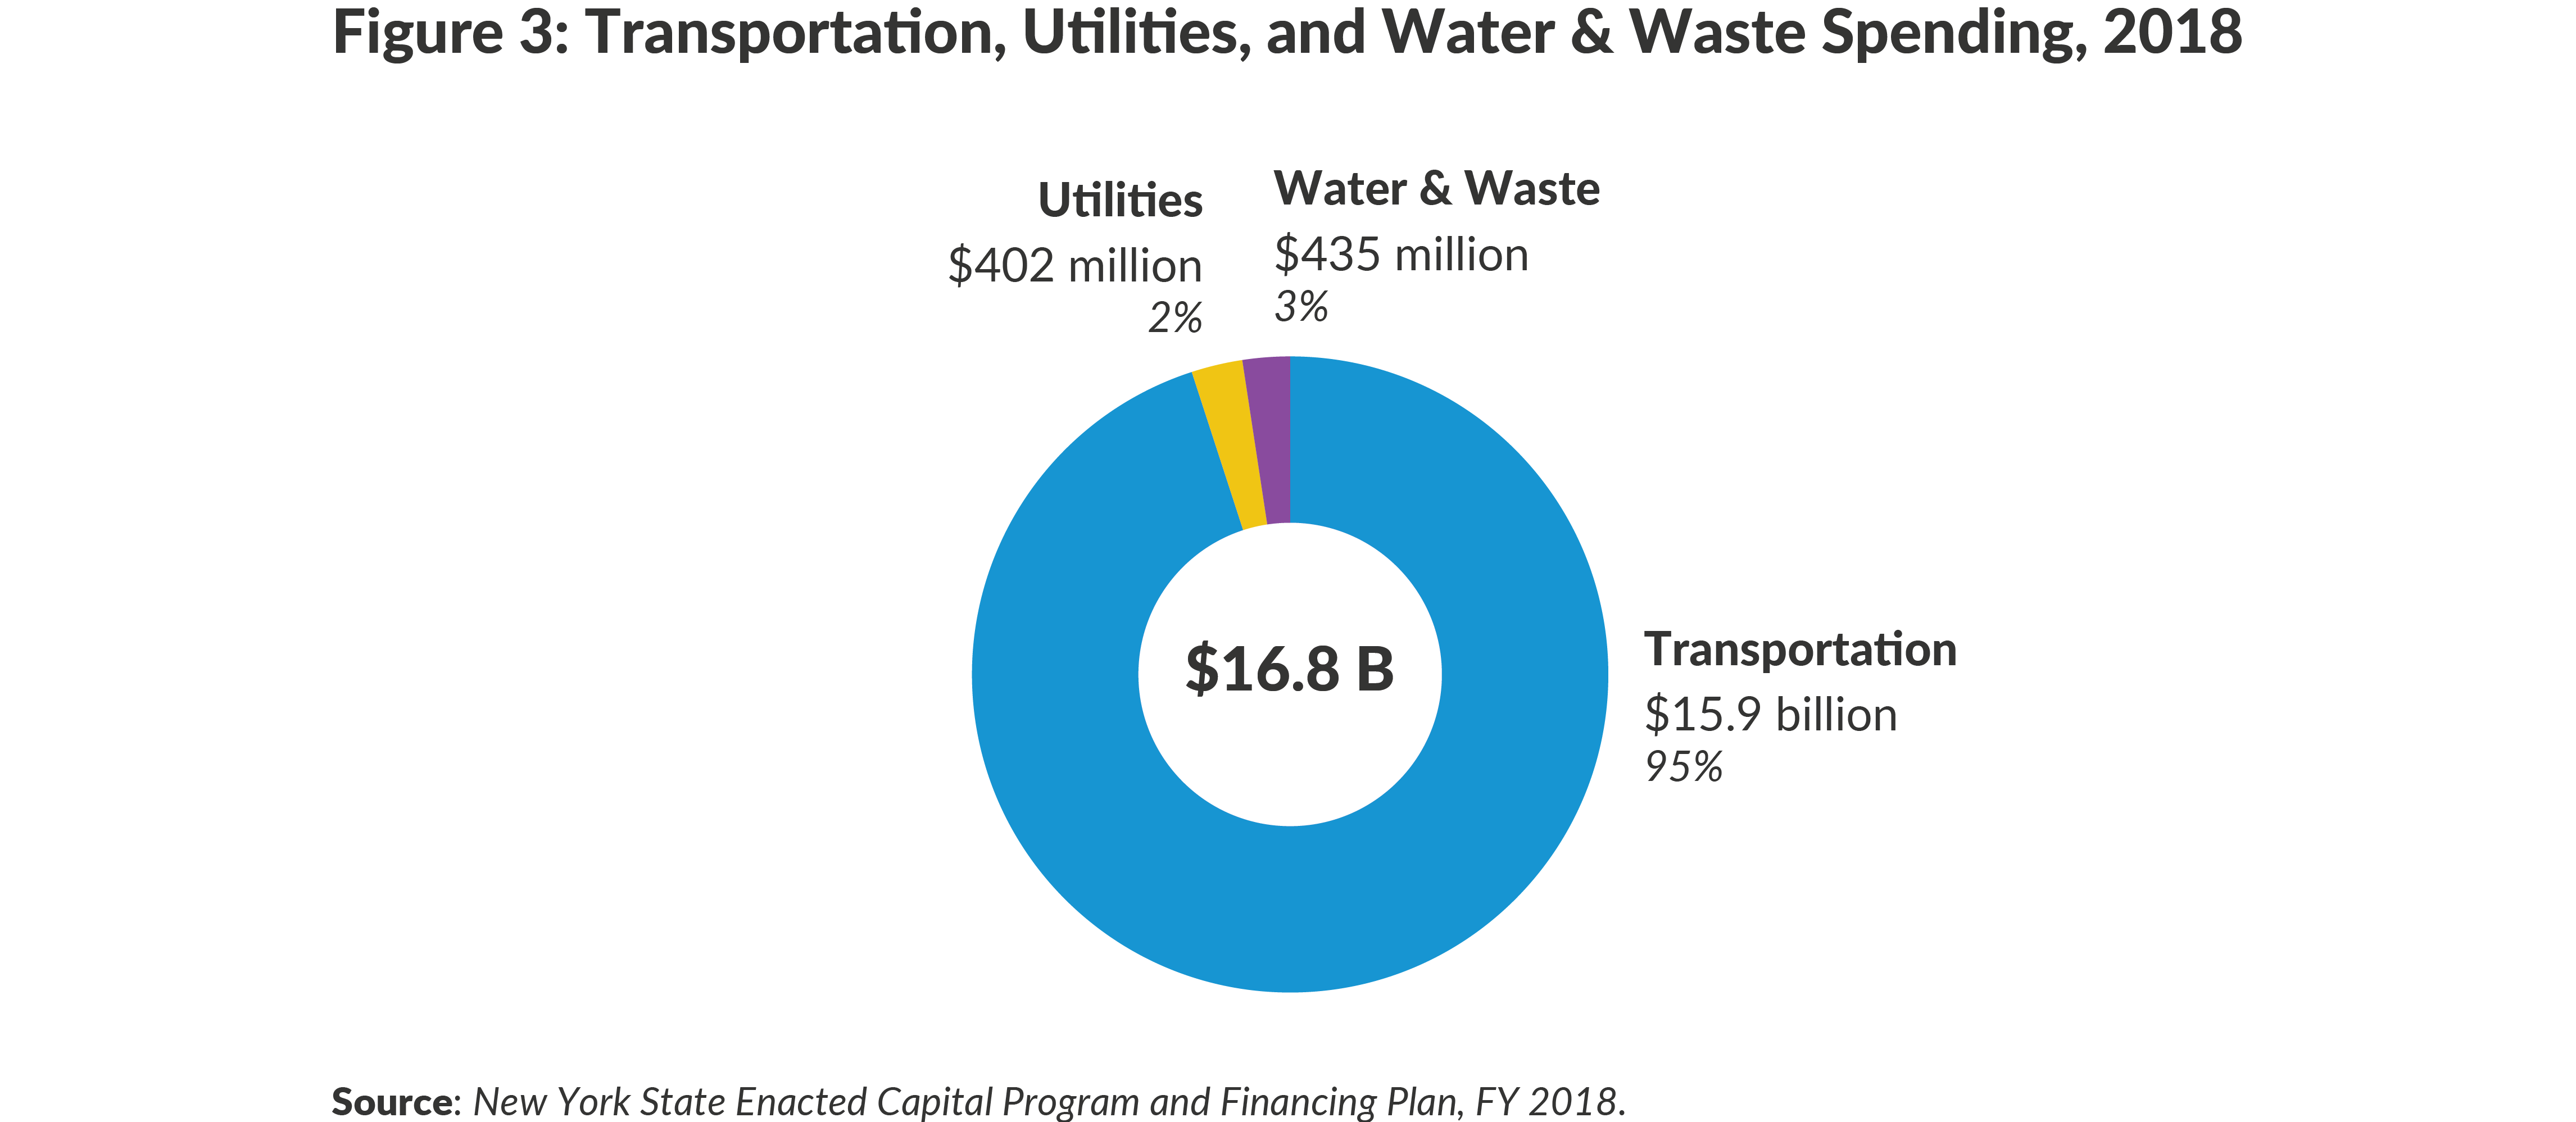 Figure 3: Transportation, Utilities, and Water & Waste Spending, 2018